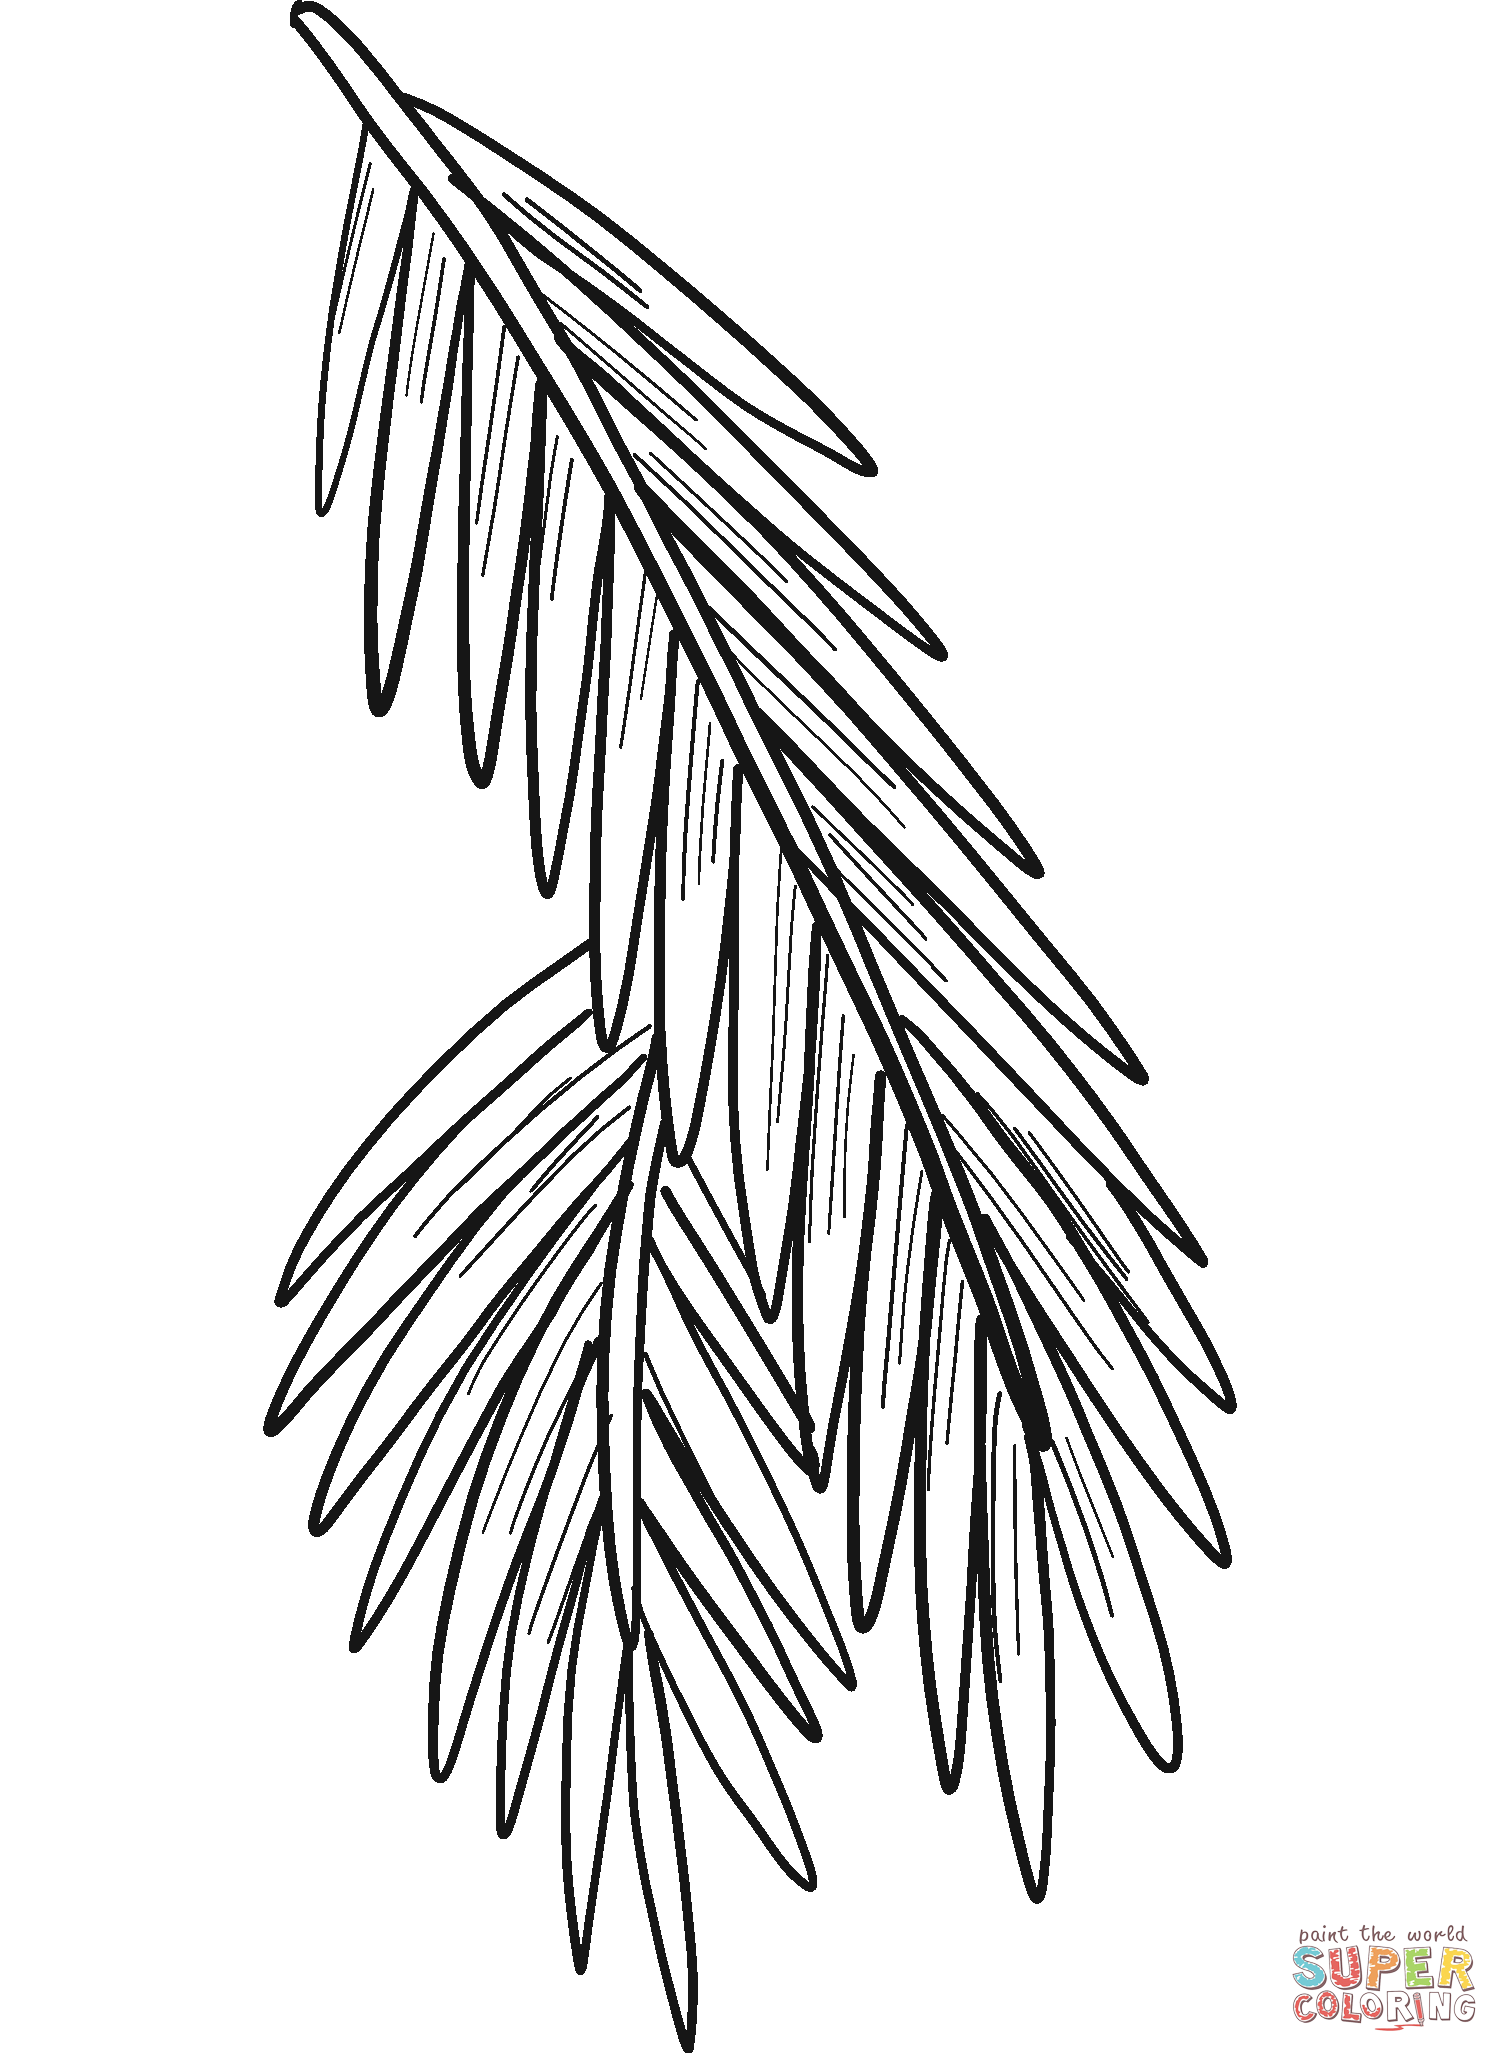 Evergreen Tree Branch coloring page | Free Printable Coloring Pages